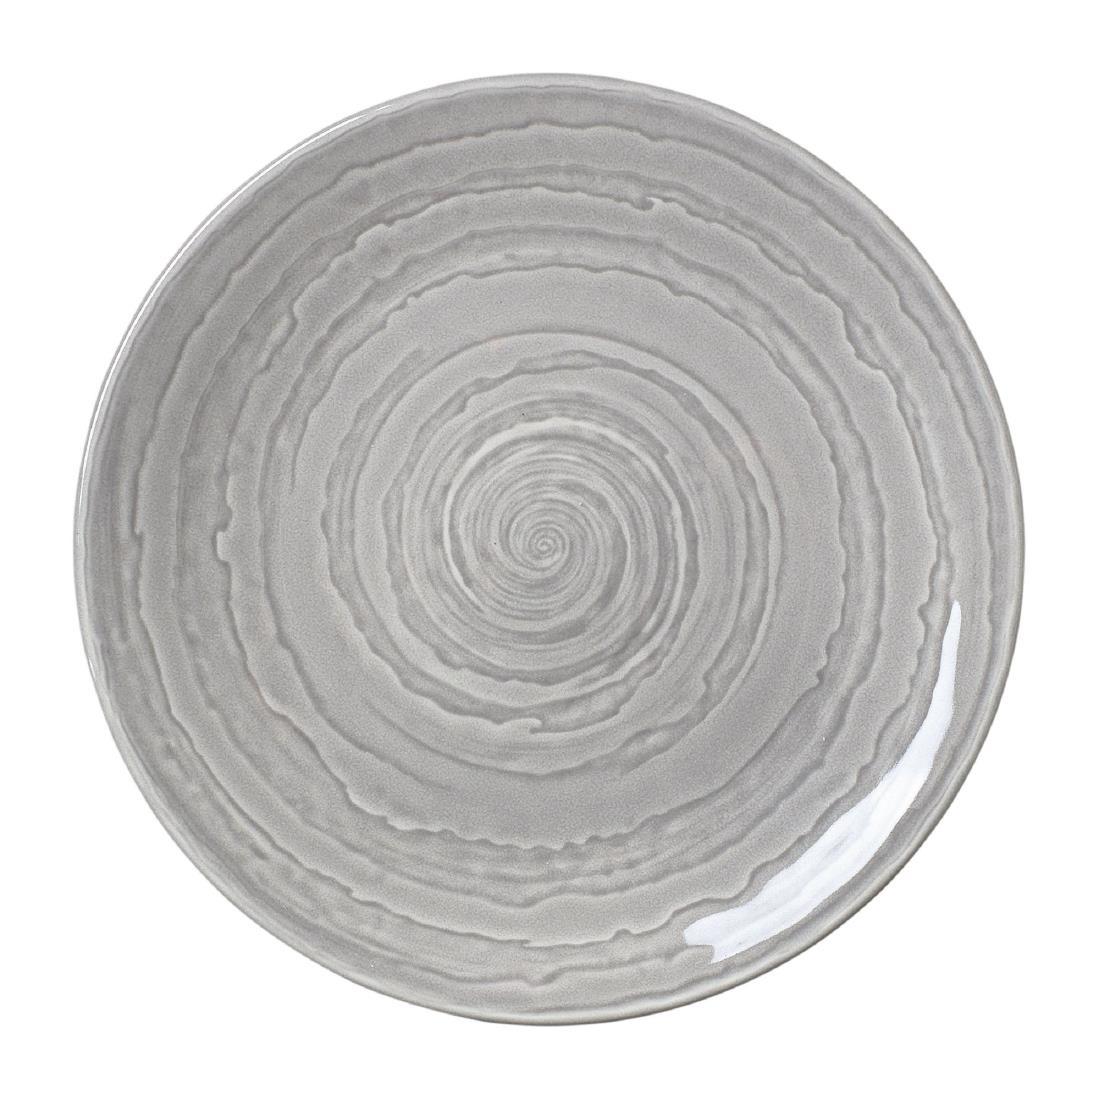 Steelite Scape Grey Coupe Plates 203mm (Pack of 12) - VV1007  - 1